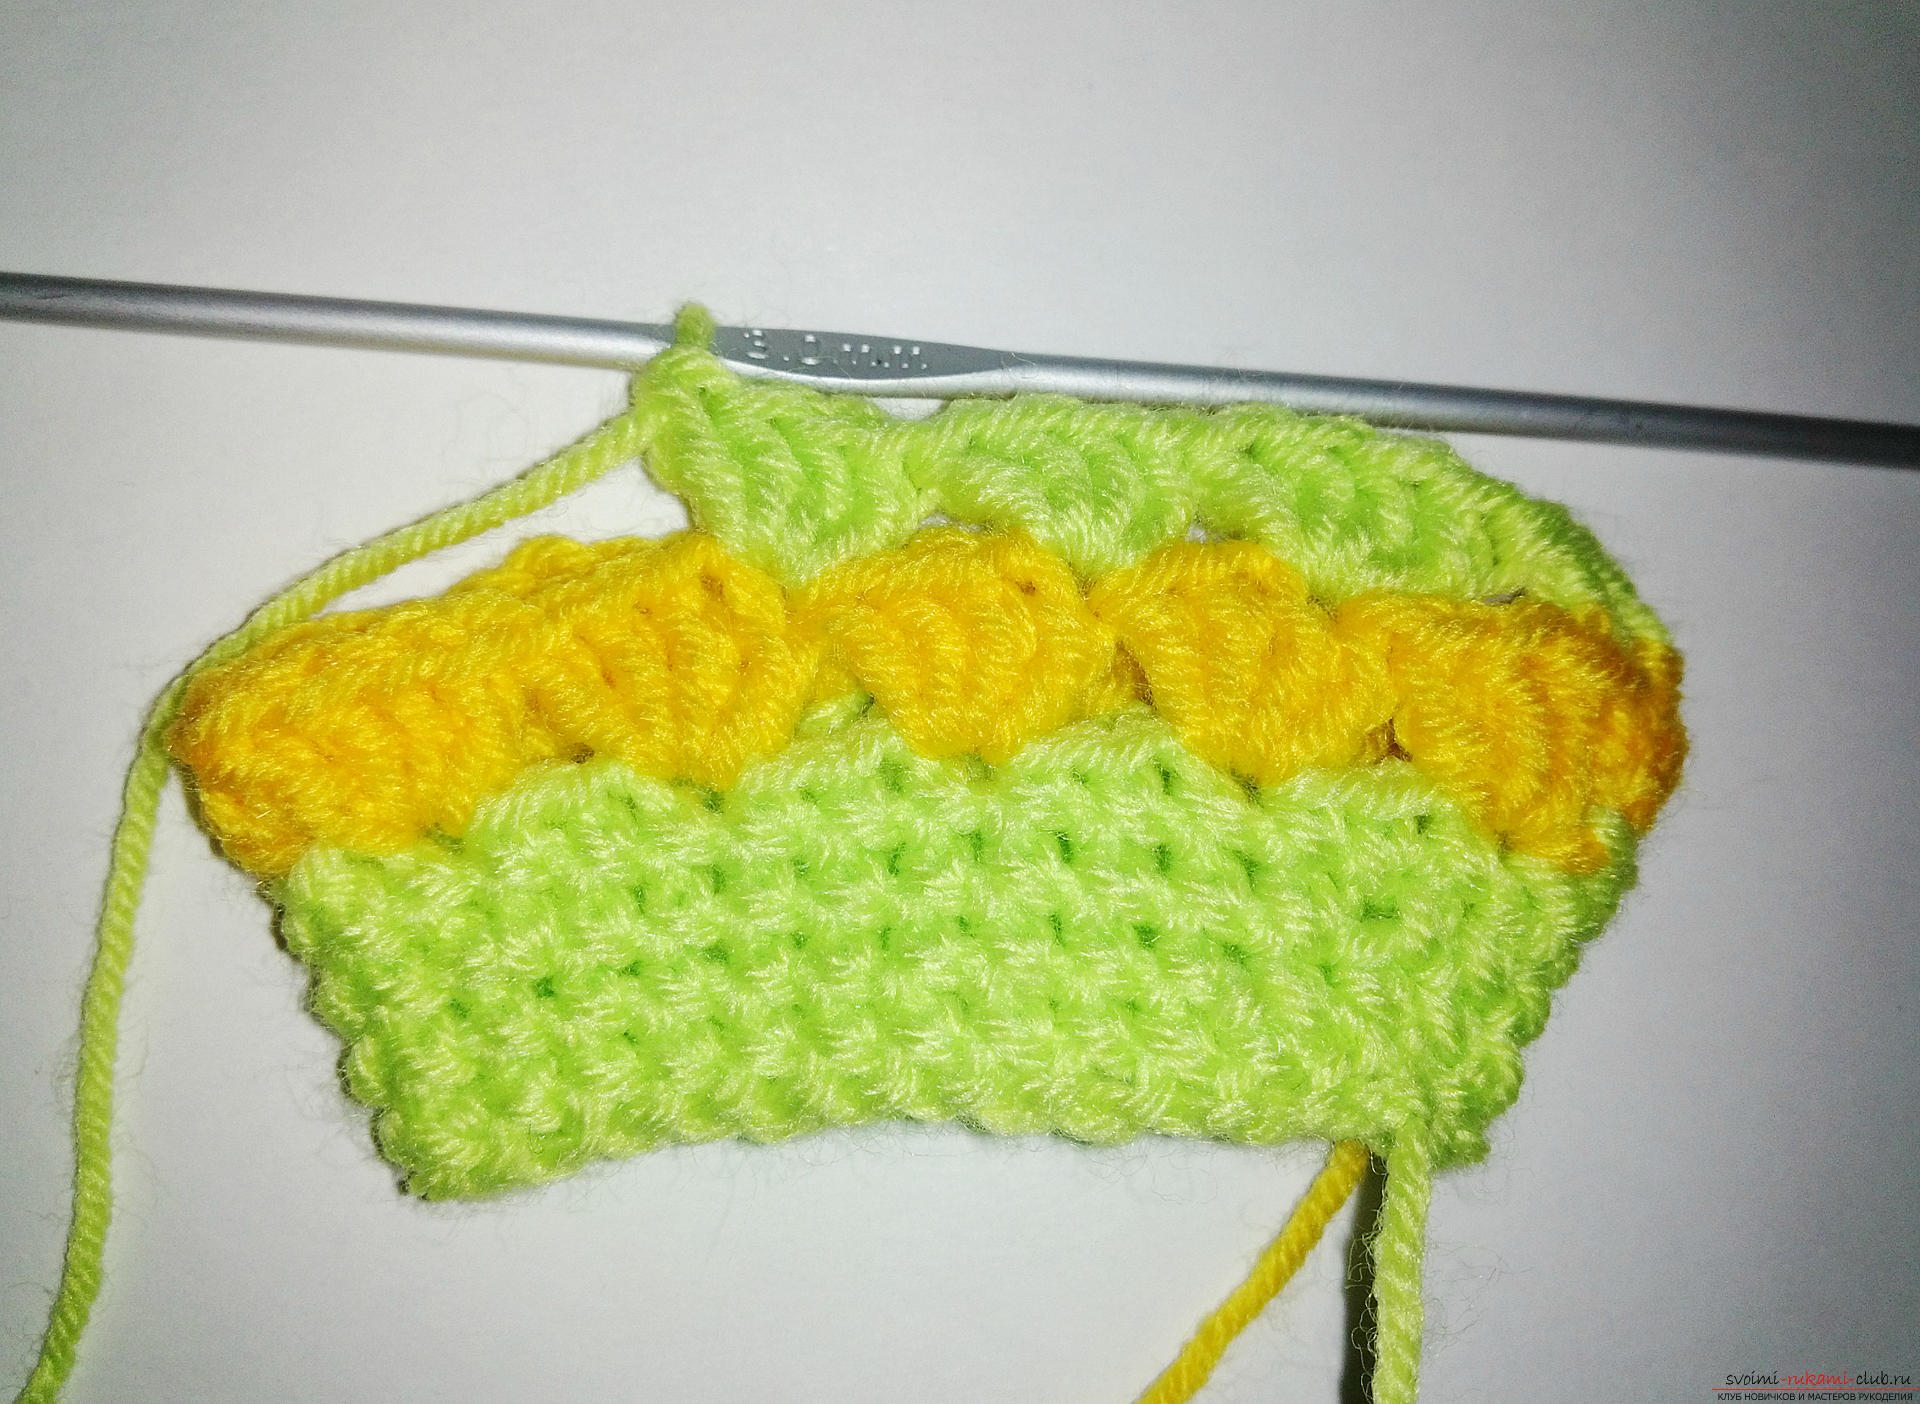 A master class with a photo and a description of the process will teach how to tie fishnet mitts crochet. Photo №5